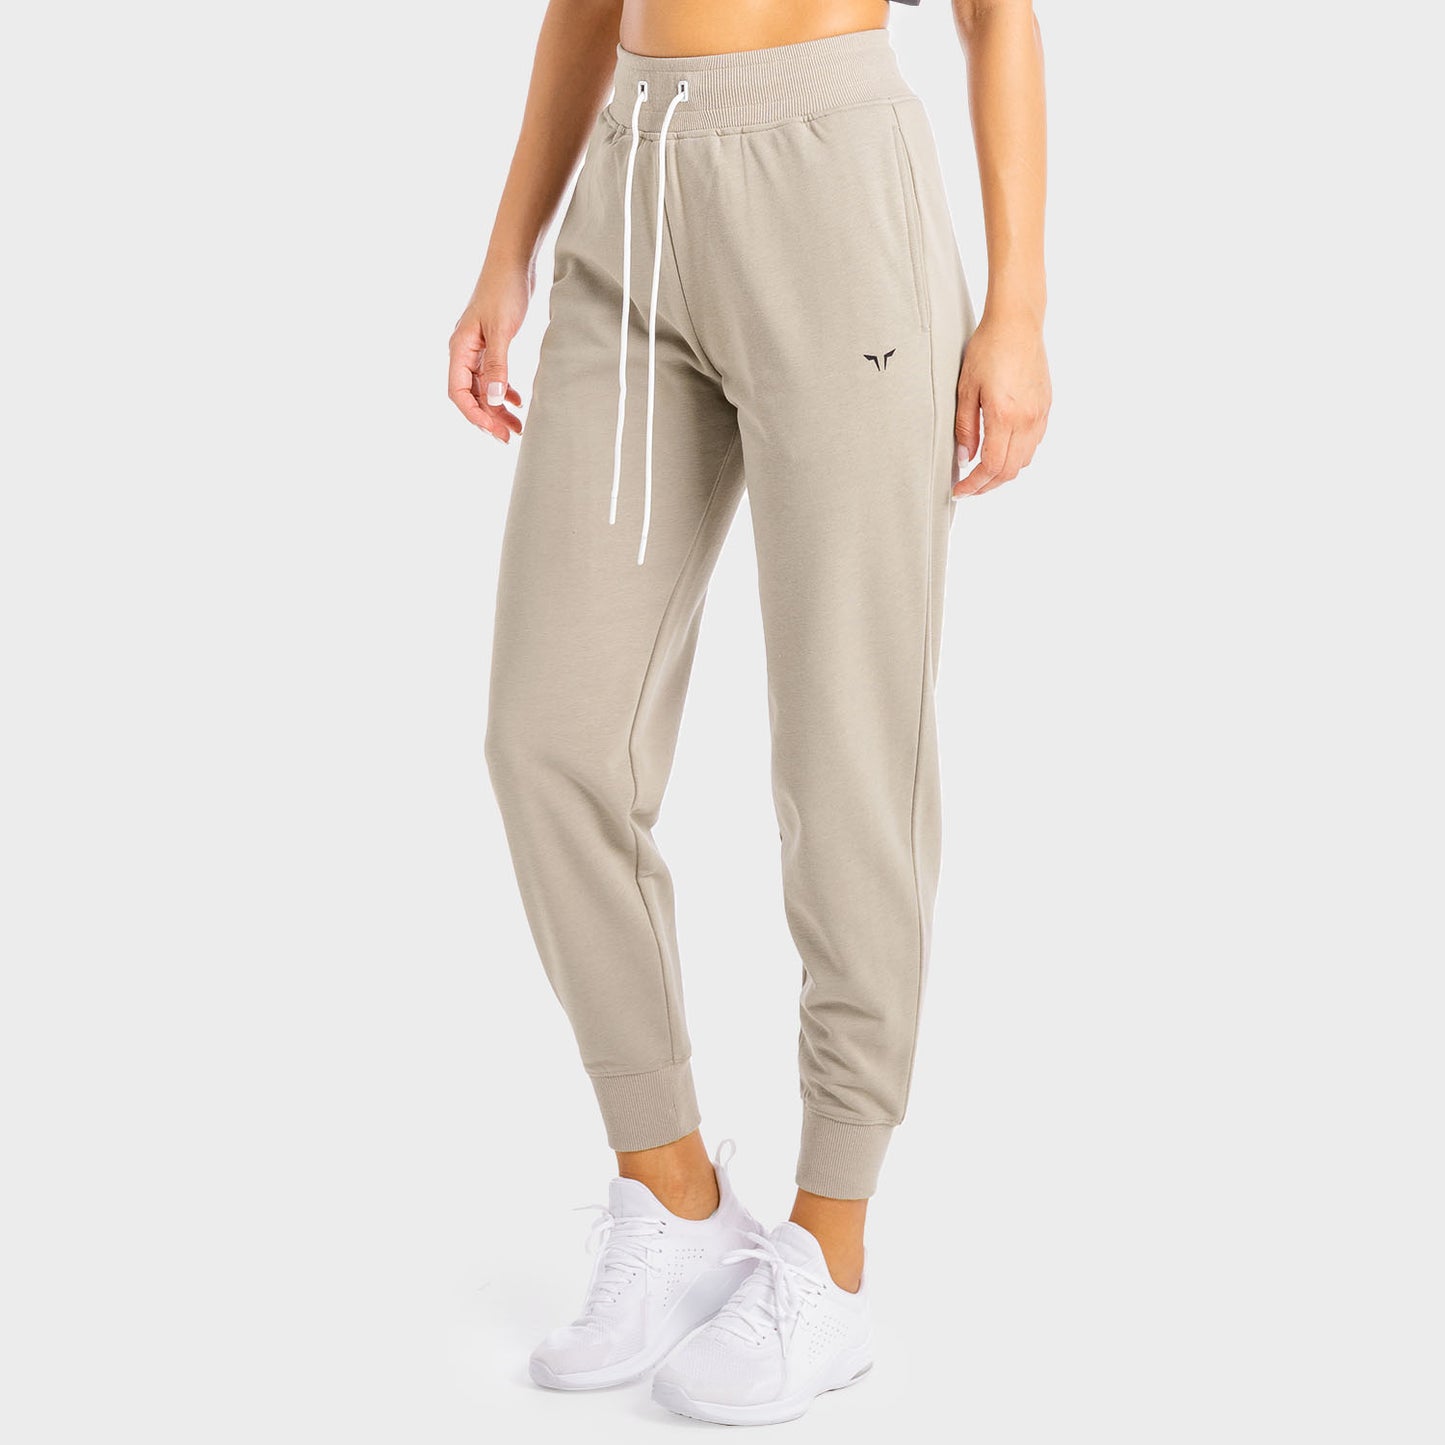 squatwolf-gym-pants-for-women-core-oversize-joggers-taupe-workout-clothes